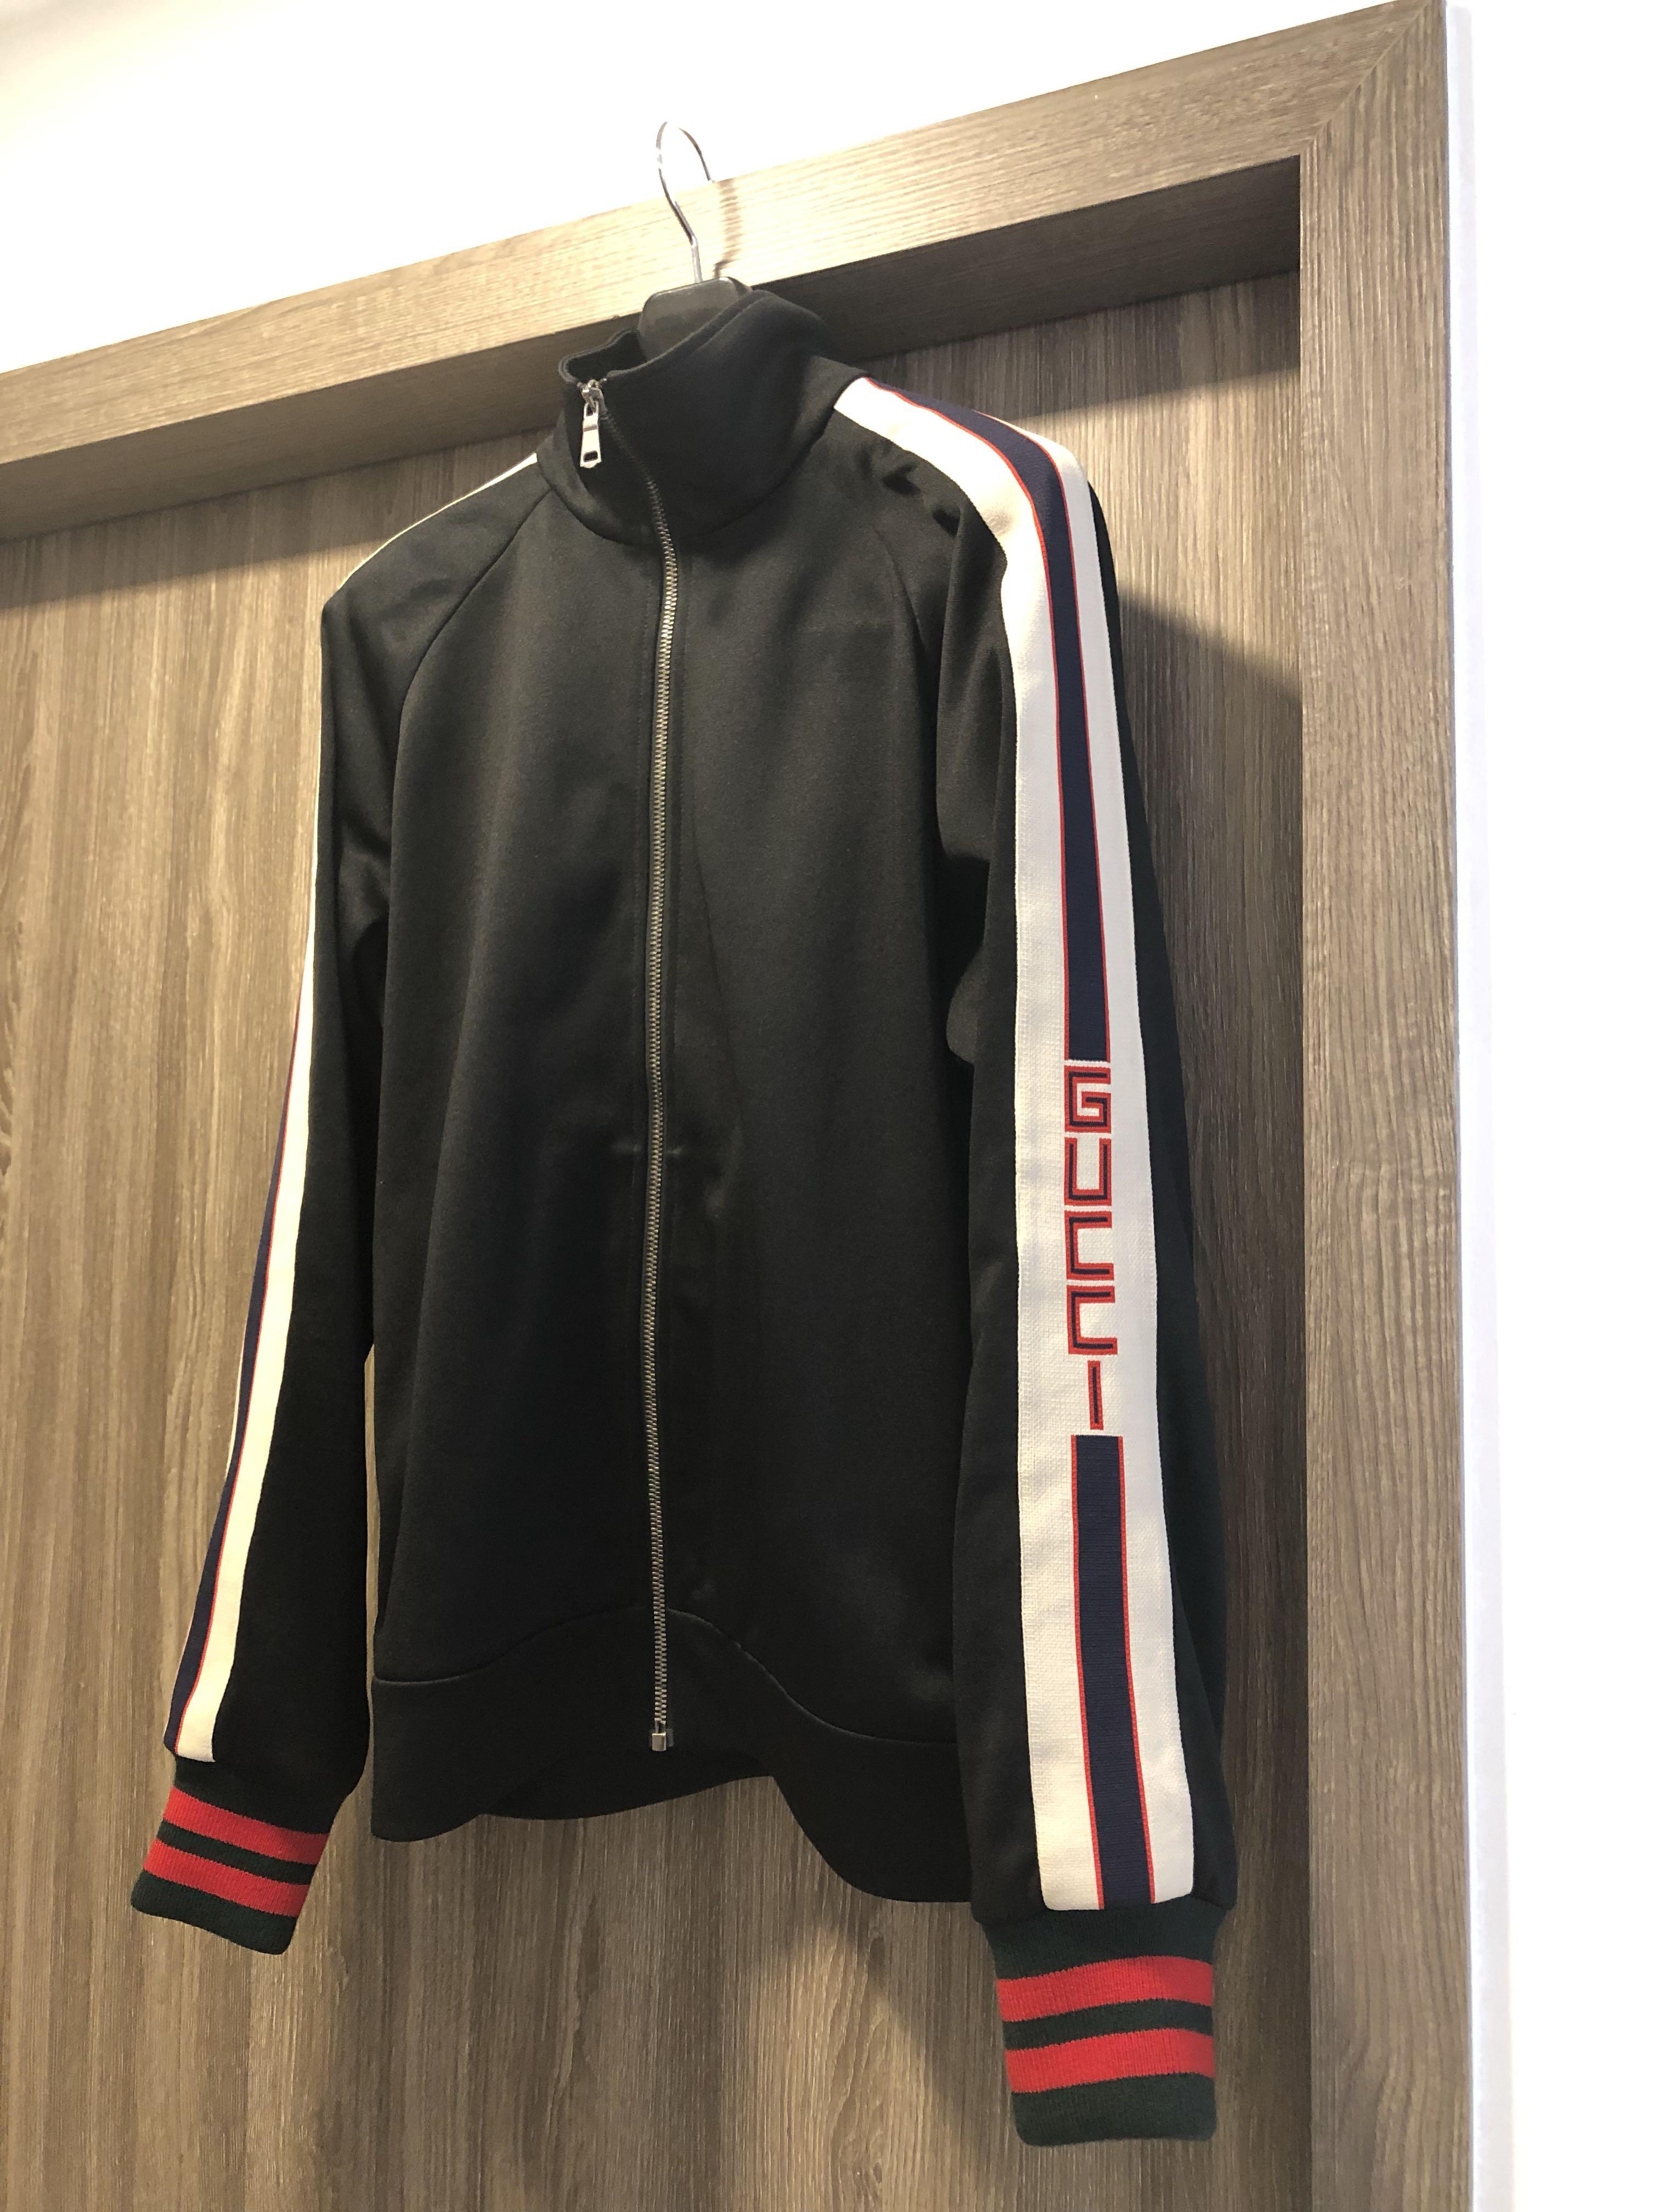 gucci technical jacket